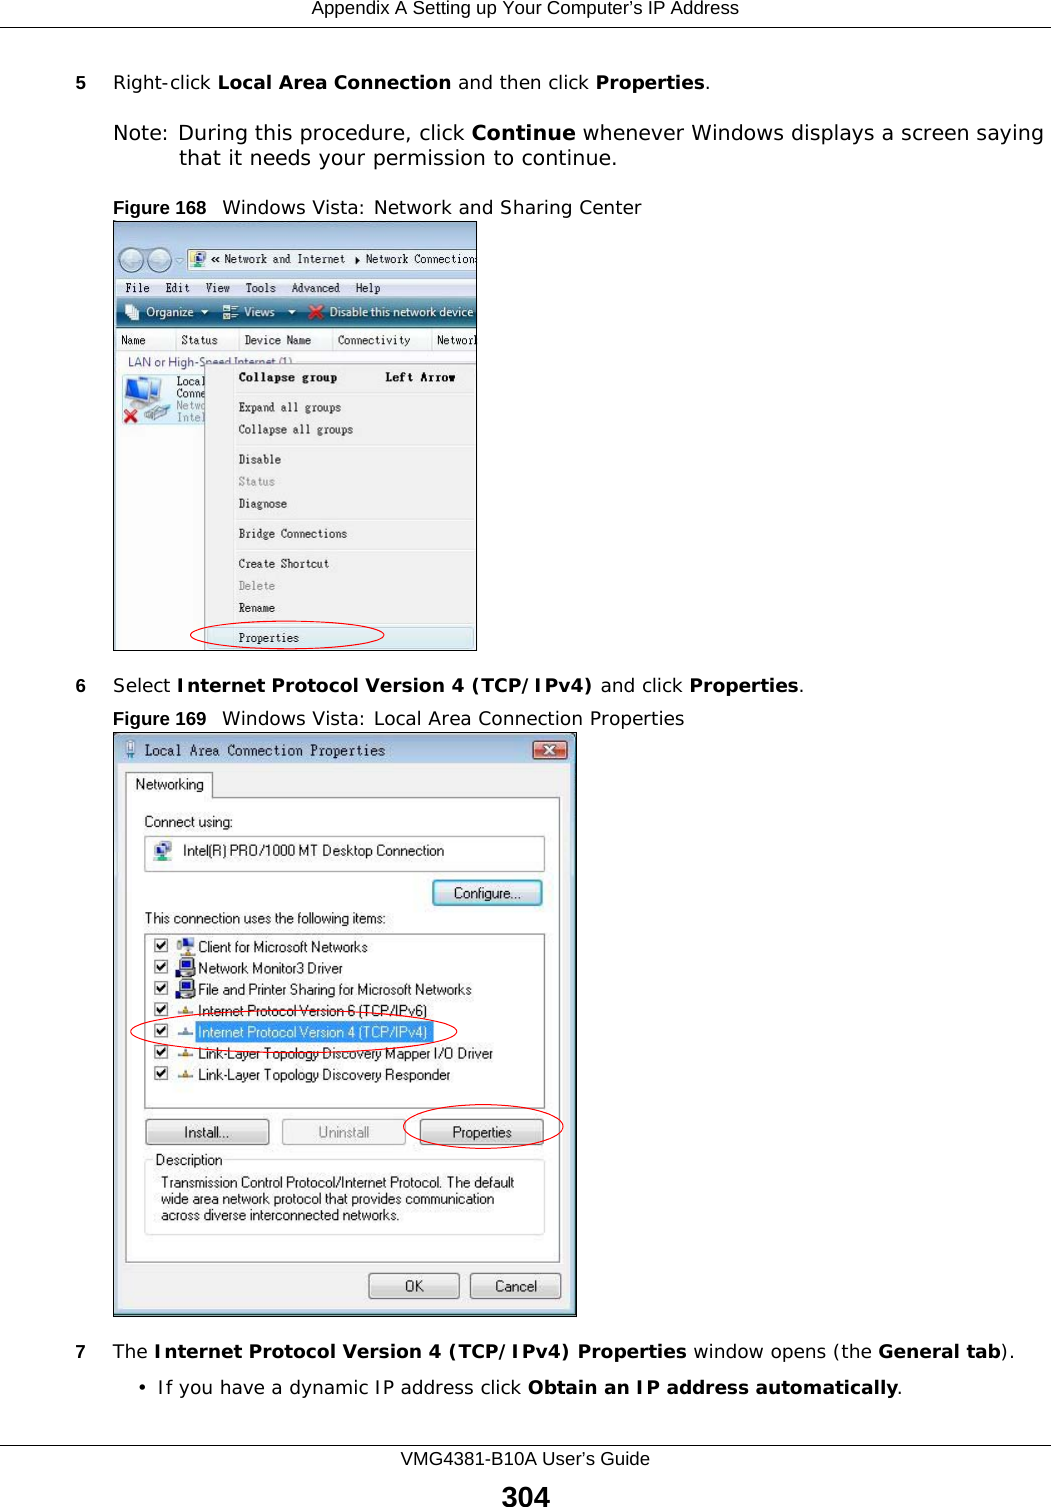 Appendix A Setting up Your Computer’s IP AddressVMG4381-B10A User’s Guide3045Right-click Local Area Connection and then click Properties.Note: During this procedure, click Continue whenever Windows displays a screen saying that it needs your permission to continue.Figure 168   Windows Vista: Network and Sharing Center6Select Internet Protocol Version 4 (TCP/IPv4) and click Properties.Figure 169   Windows Vista: Local Area Connection Properties7The Internet Protocol Version 4 (TCP/IPv4) Properties window opens (the General tab).• If you have a dynamic IP address click Obtain an IP address automatically.